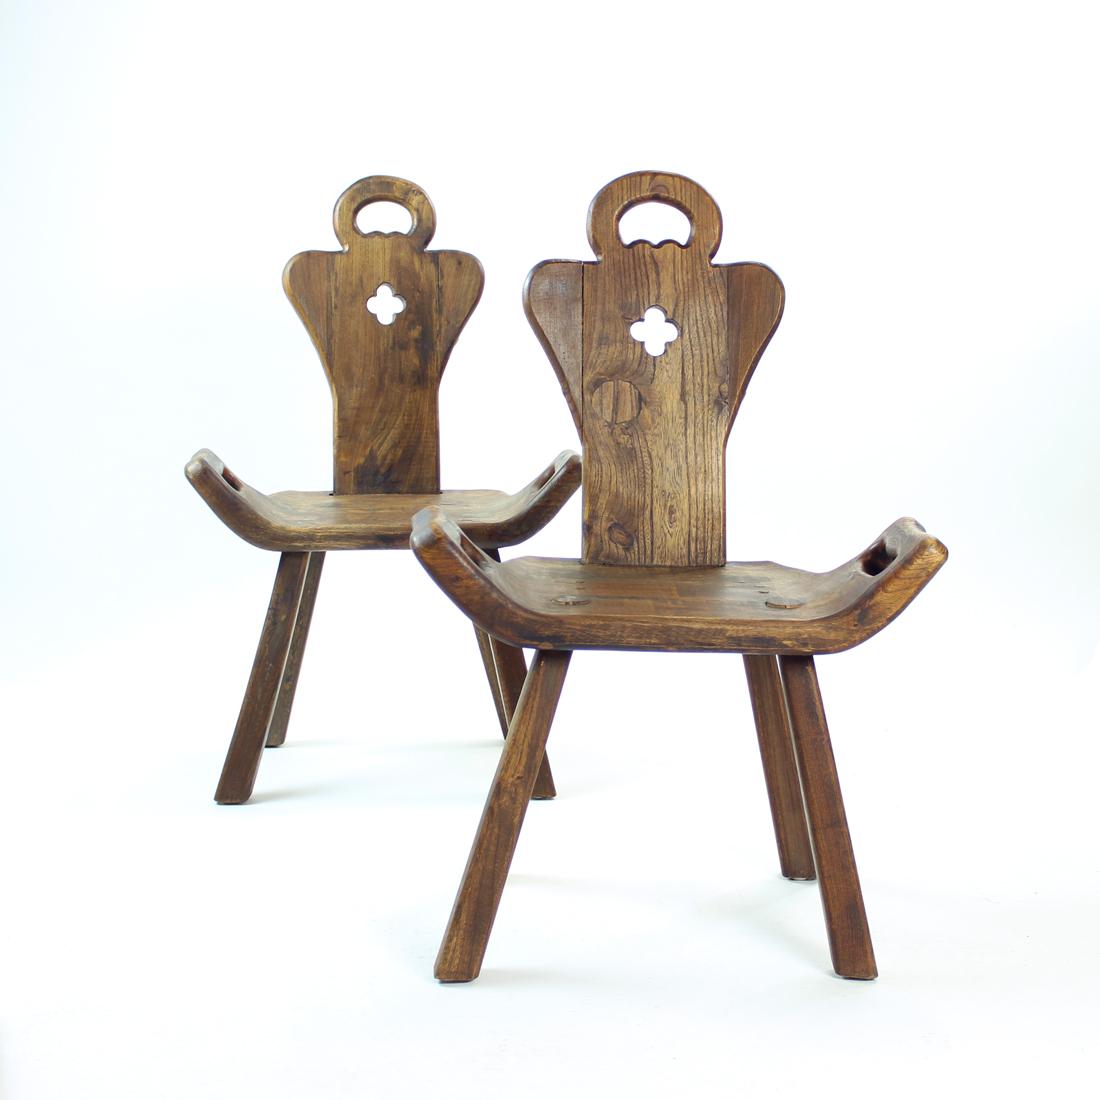 Wooden Handmade Occassional Chair, Holland 1920s For Sale 7